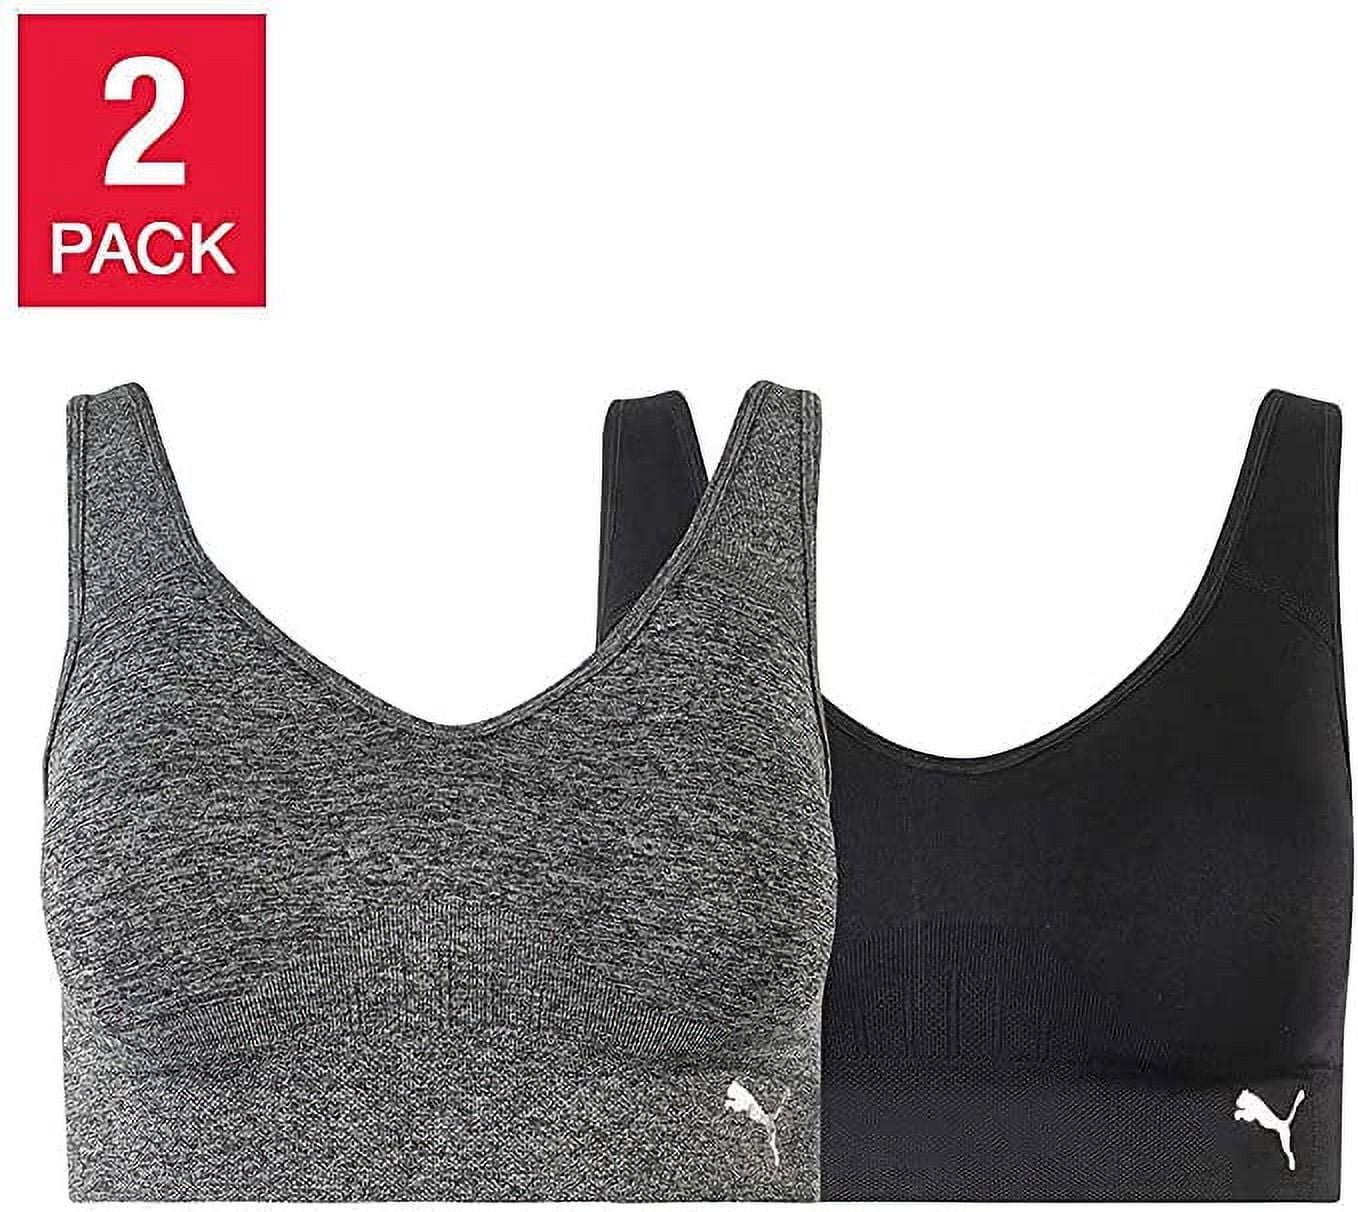 PUMA Womens Removable Cups Racerback Sports Bra 2 Pack at